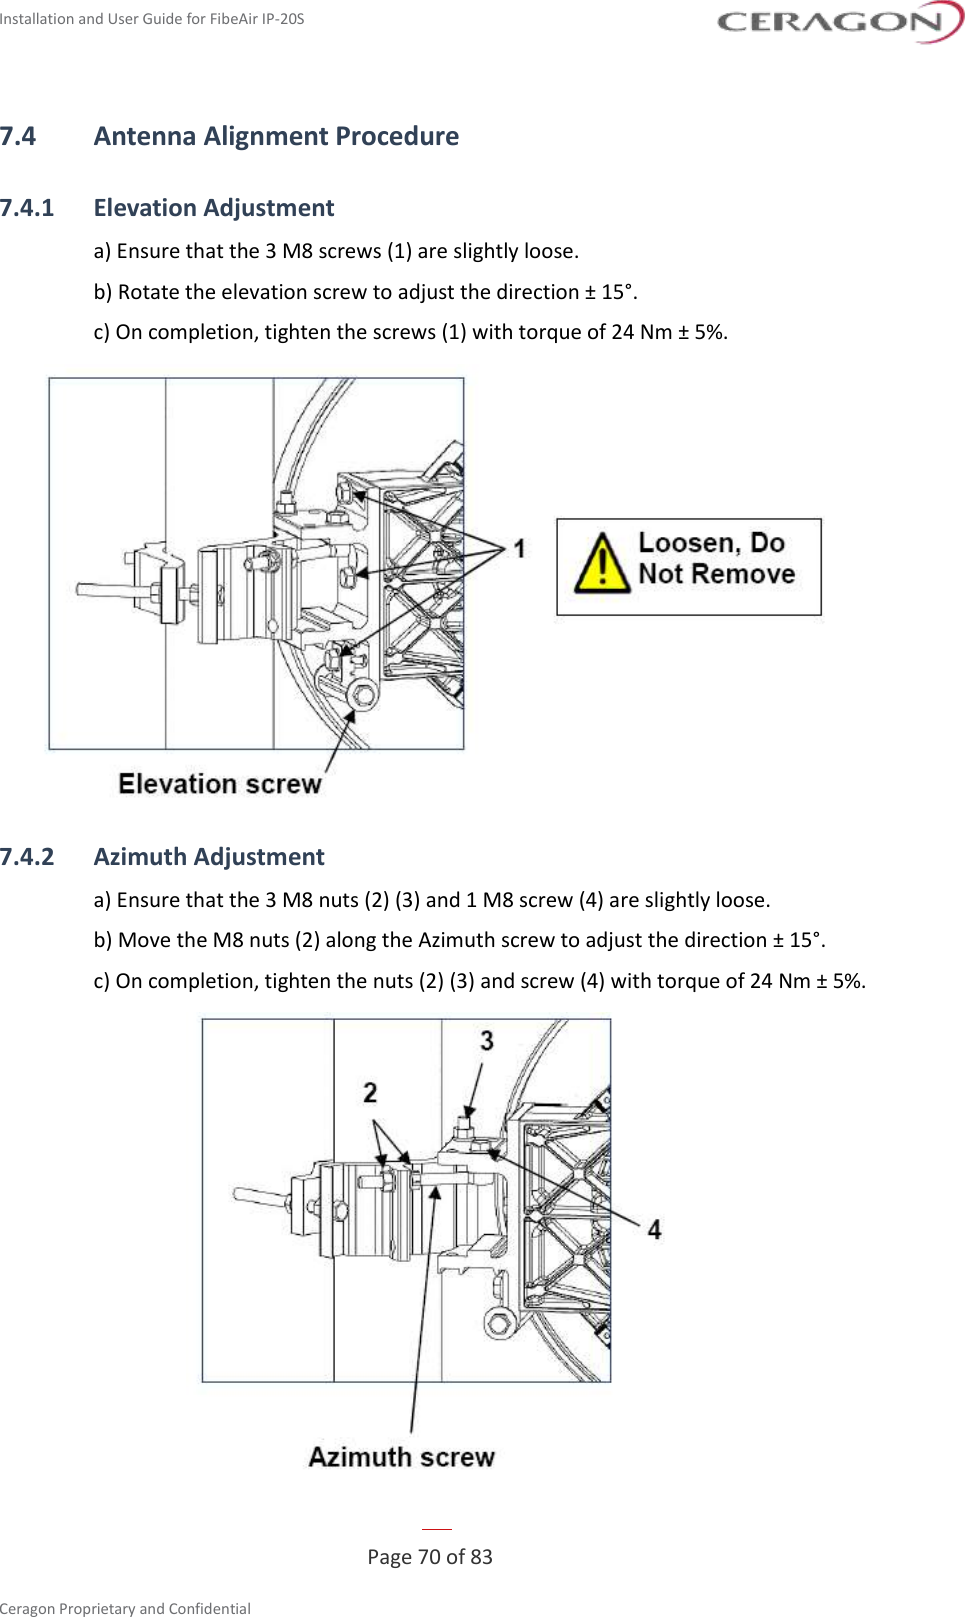 Installation and User Guide for FibeAir IP-20S   Page 70 of 83  Ceragon Proprietary and Confidential     7.4 Antenna Alignment Procedure 7.4.1 Elevation Adjustment a) Ensure that the 3 M8 screws (1) are slightly loose. b) Rotate the elevation screw to adjust the direction ± 15°. c) On completion, tighten the screws (1) with torque of 24 Nm ± 5%.  7.4.2 Azimuth Adjustment a) Ensure that the 3 M8 nuts (2) (3) and 1 M8 screw (4) are slightly loose. b) Move the M8 nuts (2) along the Azimuth screw to adjust the direction ± 15°. c) On completion, tighten the nuts (2) (3) and screw (4) with torque of 24 Nm ± 5%.  